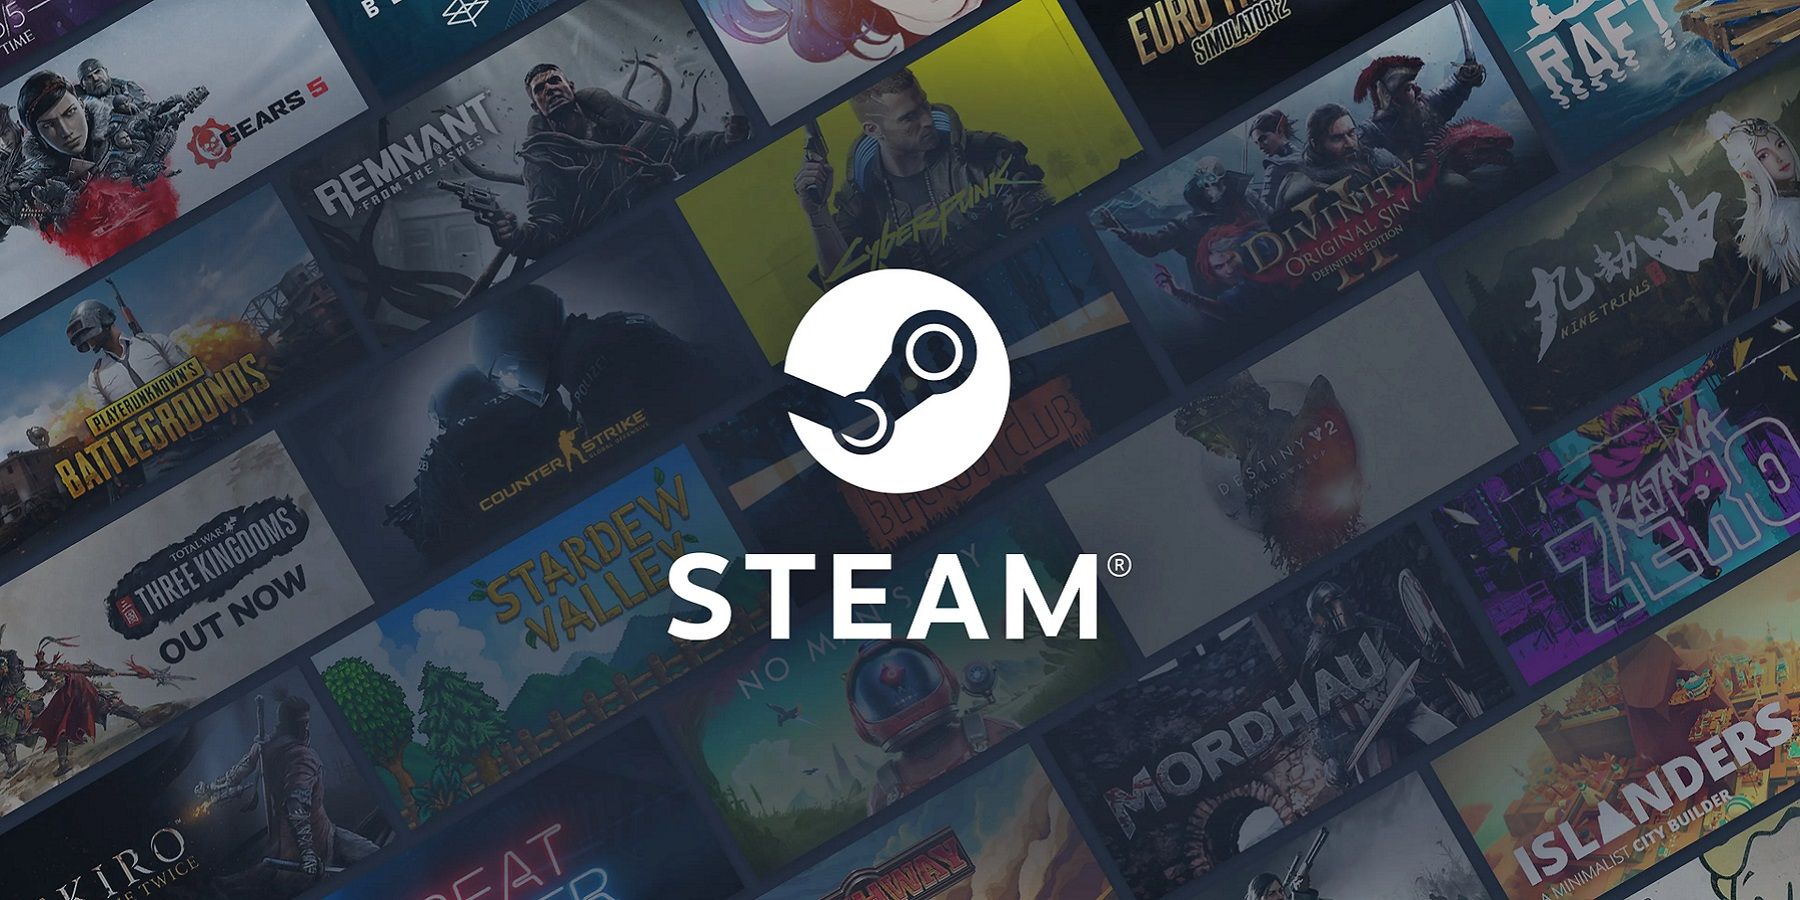 The Steam logo with a series of games in the background, including Cyberpunk 2077 and No Man's Sky.